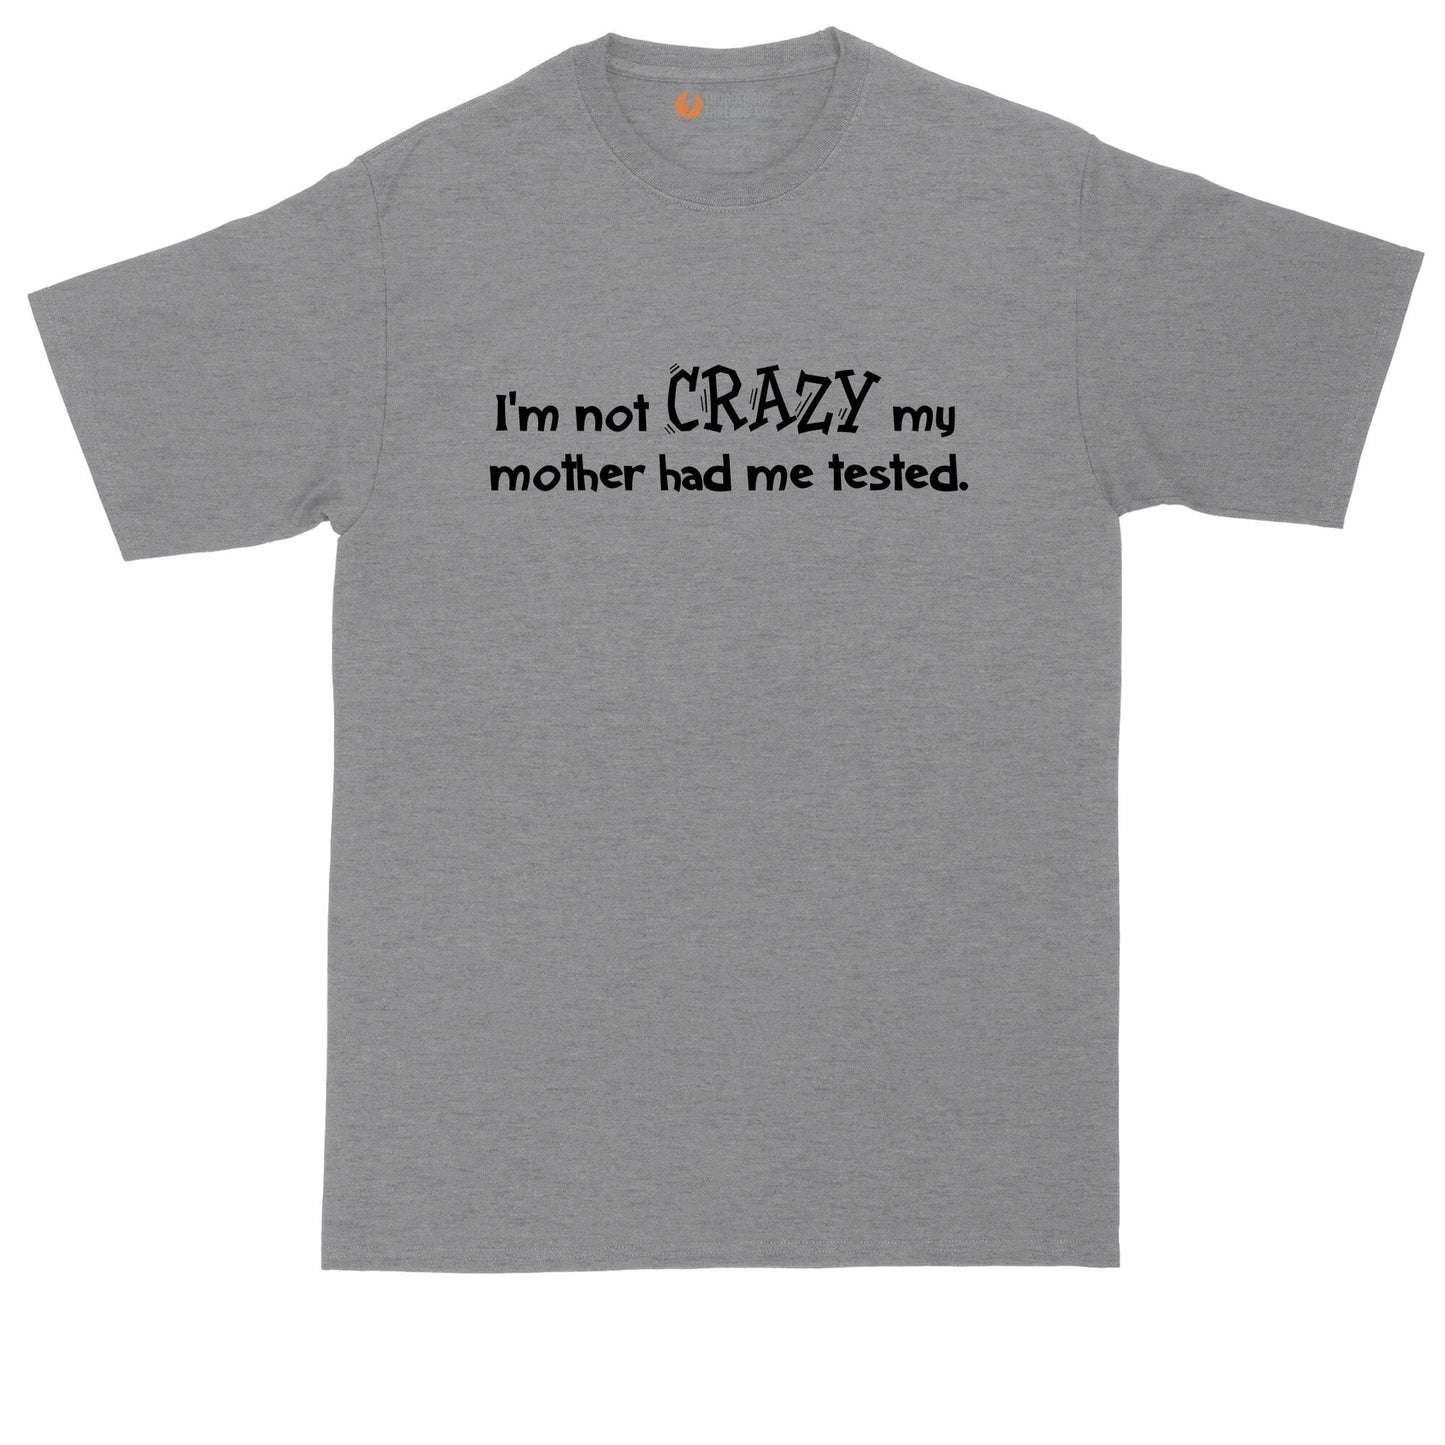 I'm Not Crazy My Mother Had Me Tested | Big and Tall Mens T-Shirt | Funny T-Shirt | Graphic T-Shirt